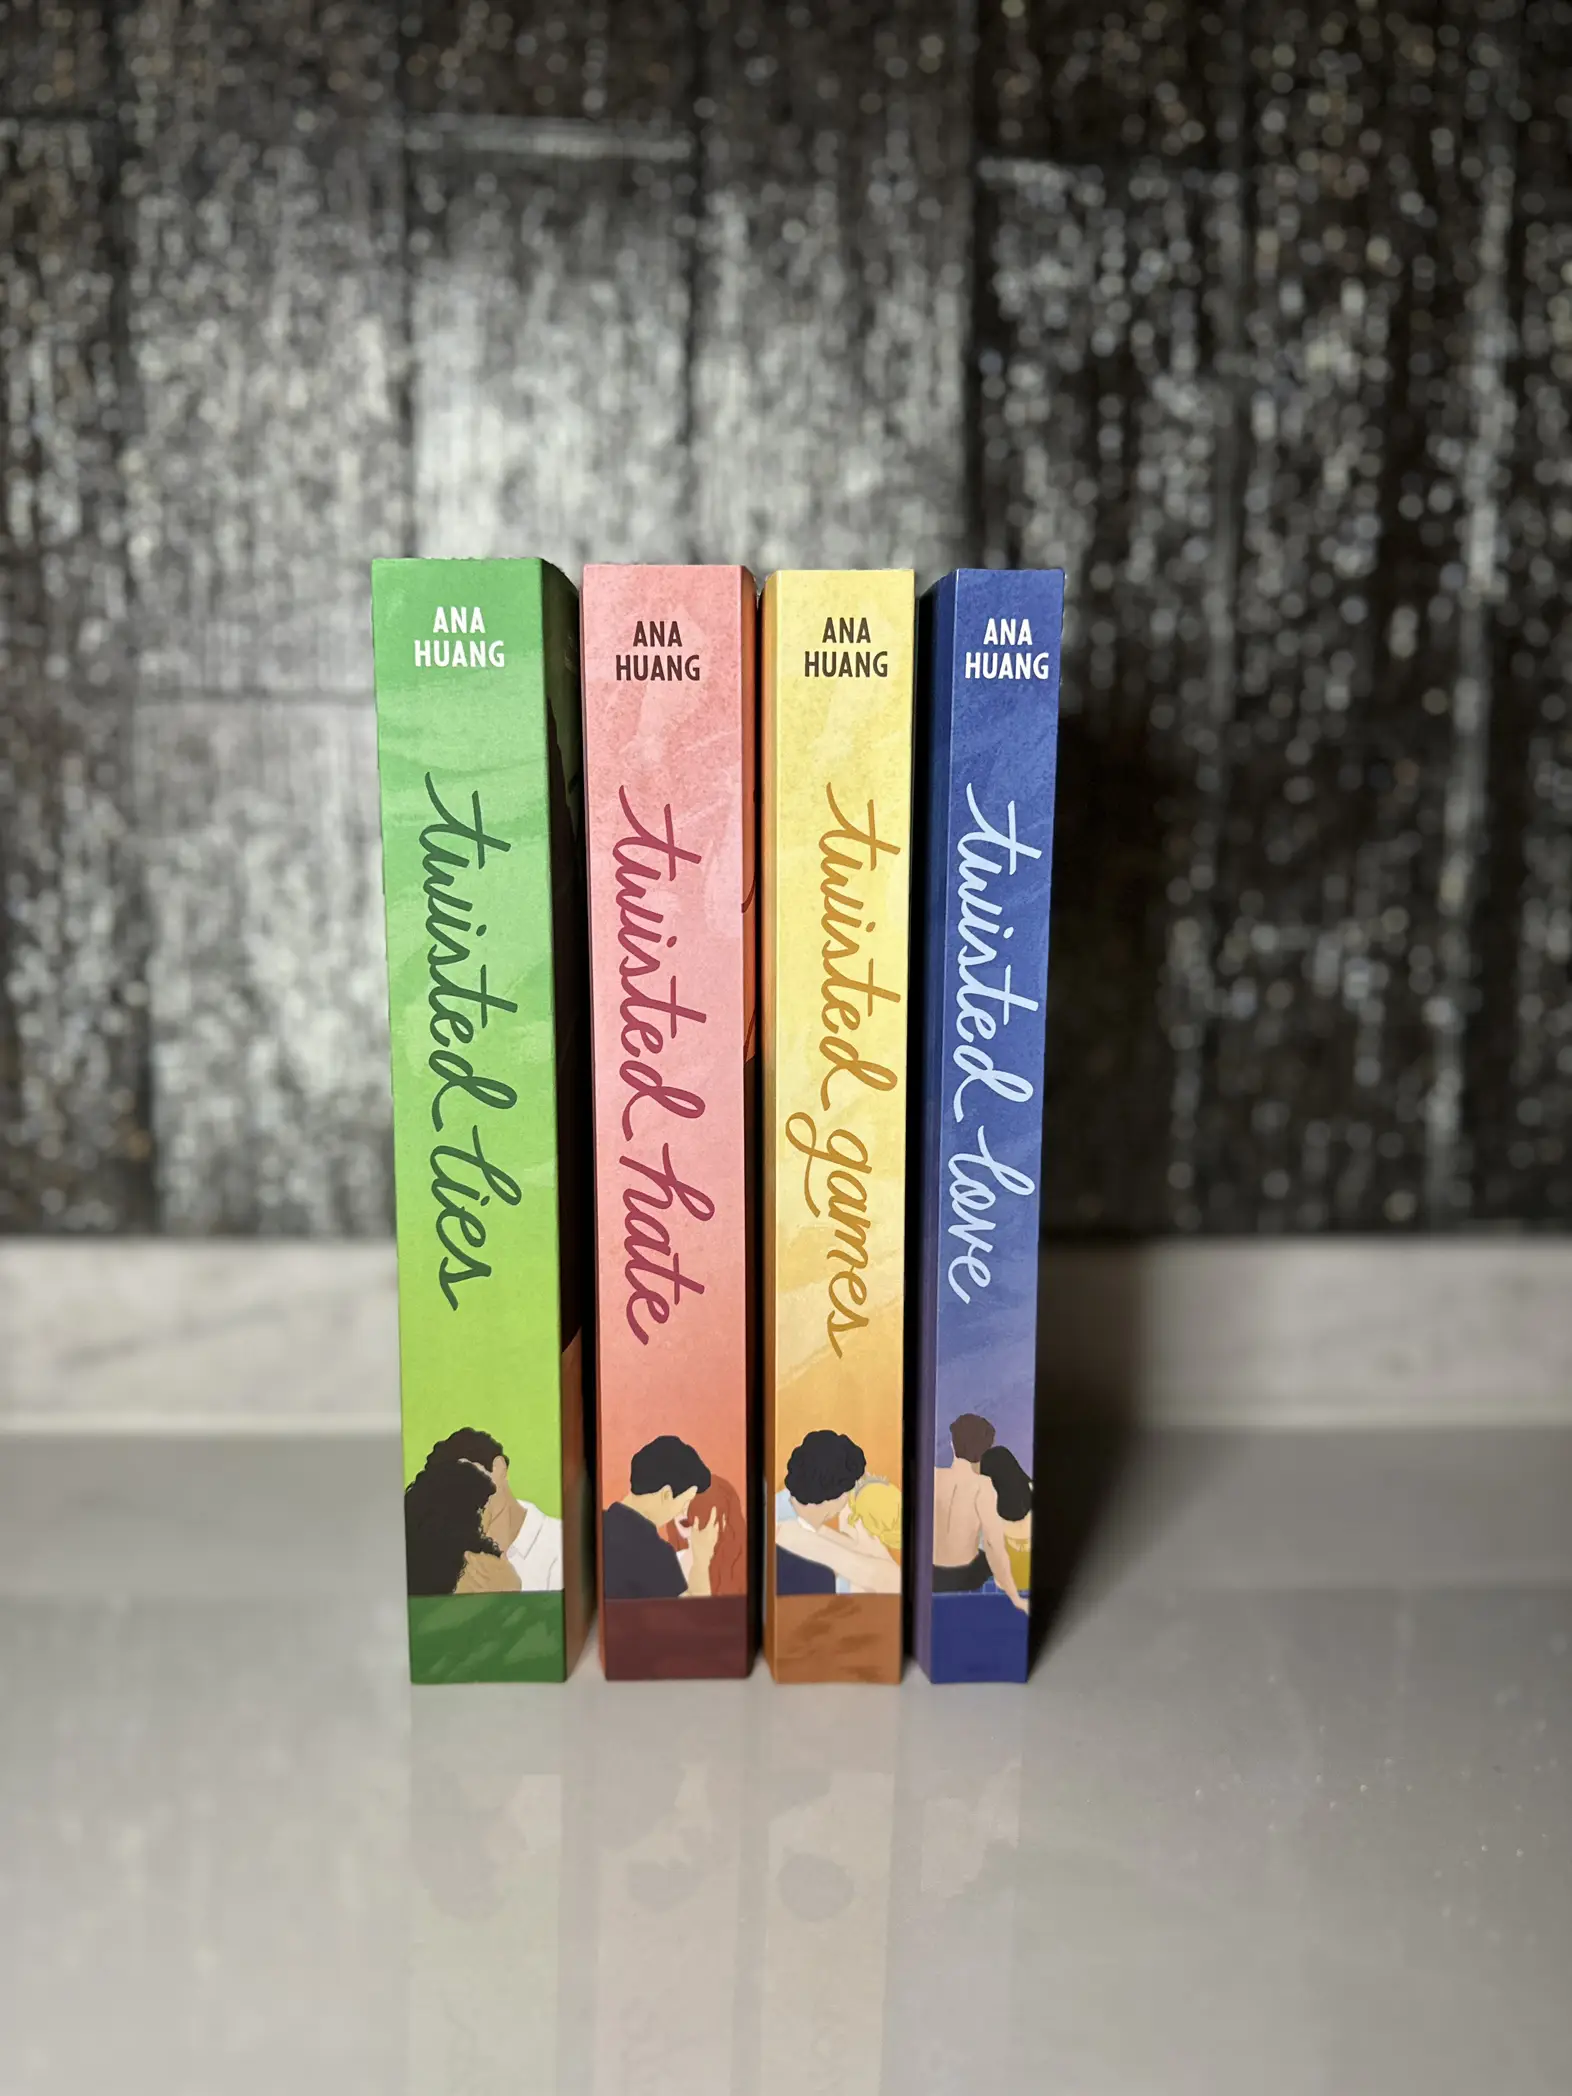 Twisted Series by Ana Huang [Twisted Love; Twisted Games; Twisted Hate and  Twisted Lies]: Ana Huang: : Books